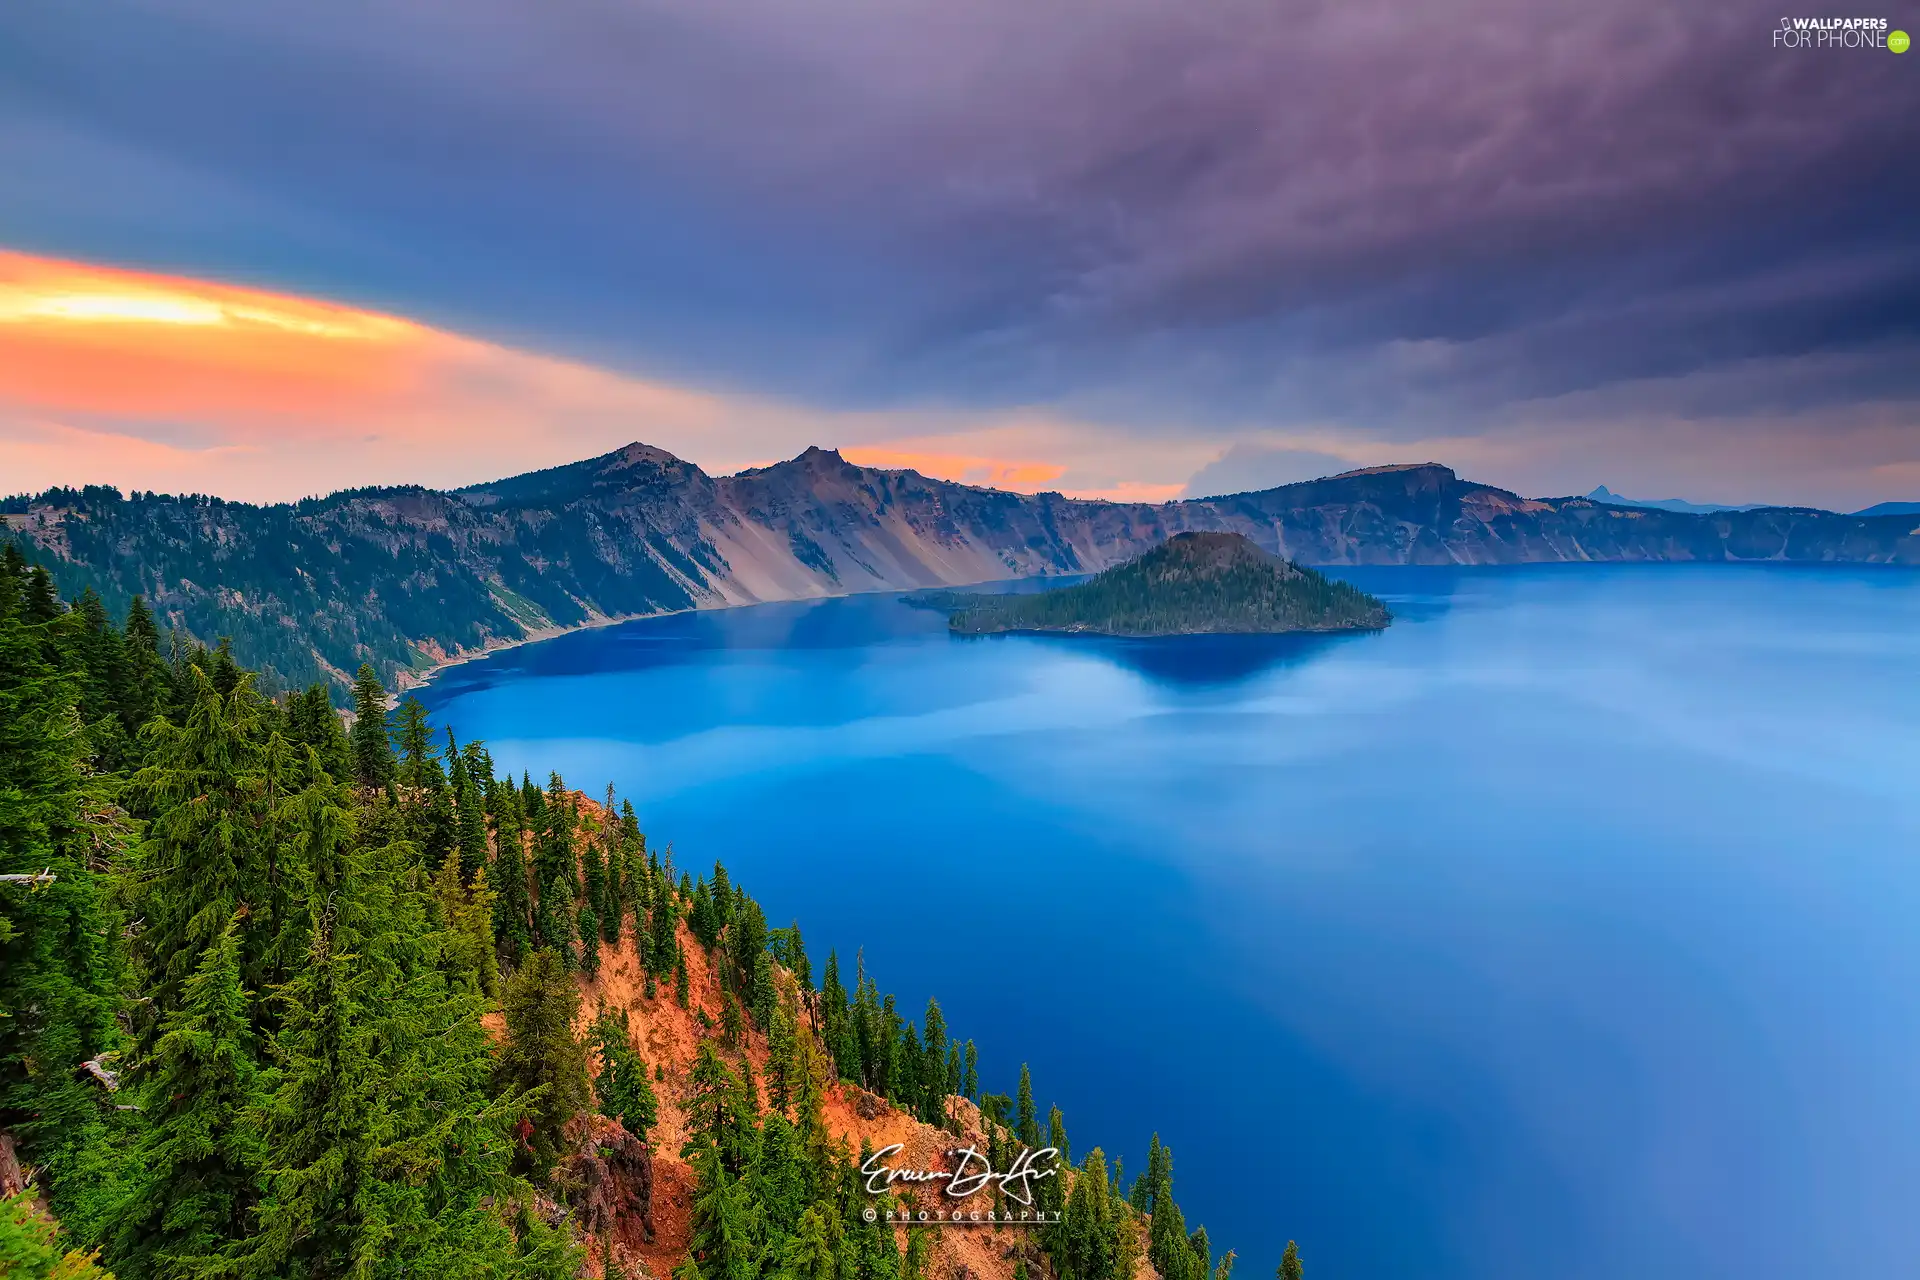 Island of Wizard, Mountains, The United States, trees, State of Oregon, Crater Lake, Crater Lake National Park, viewes